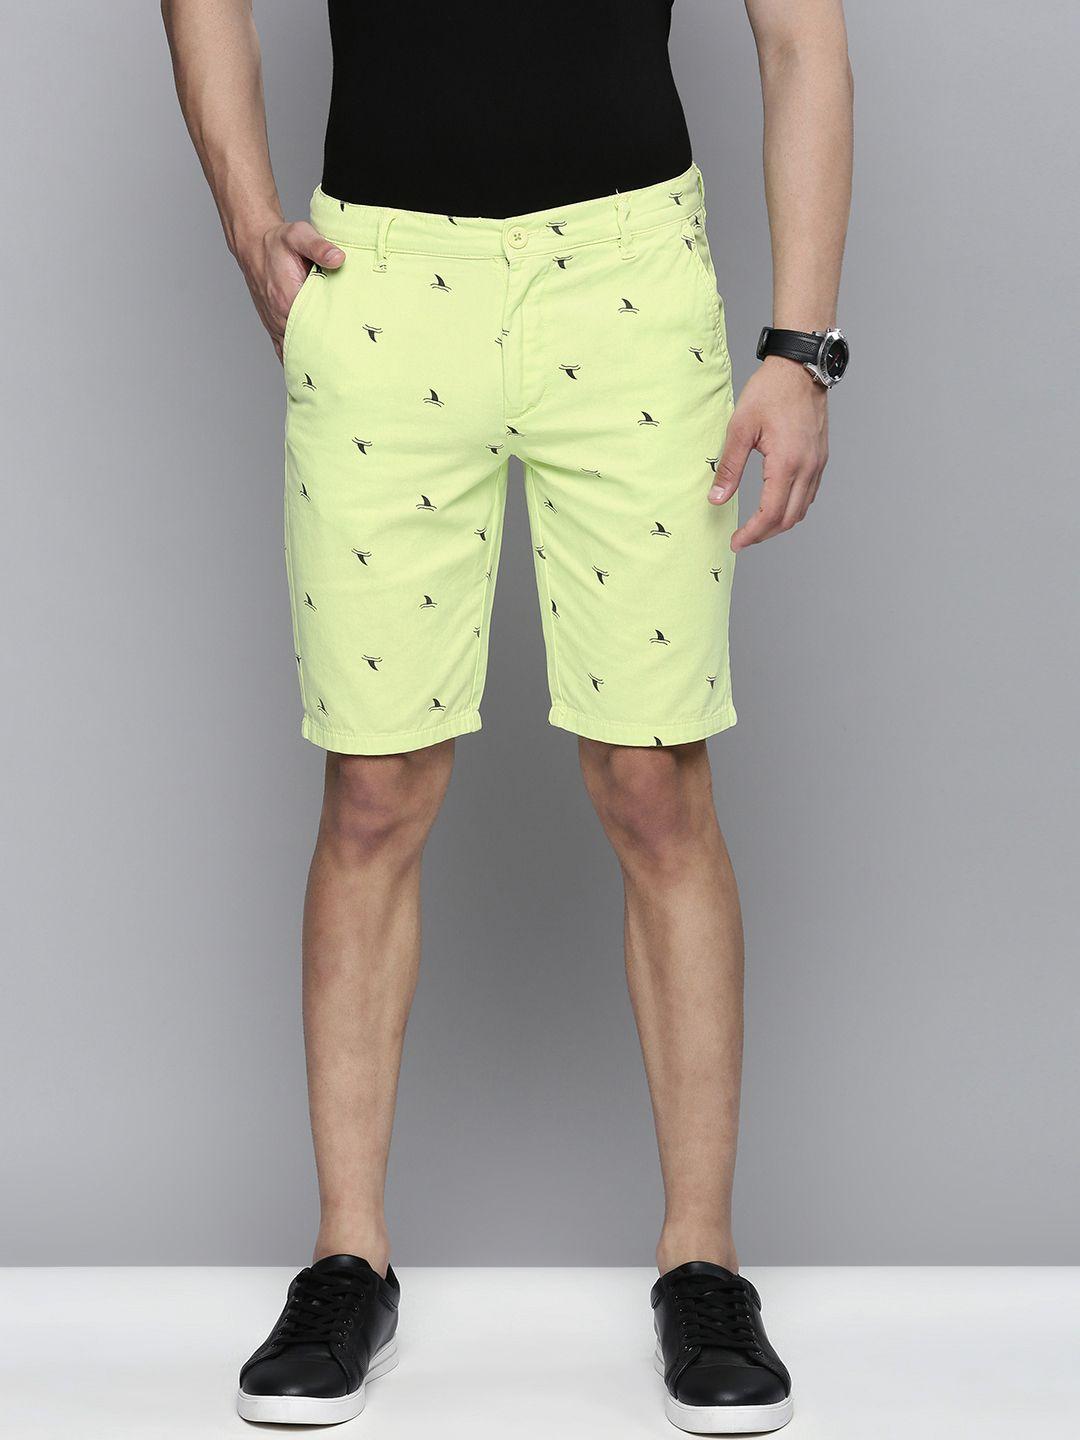 the-indian-garage-co-men-lime-green-printed-slim-fit-chino-shorts